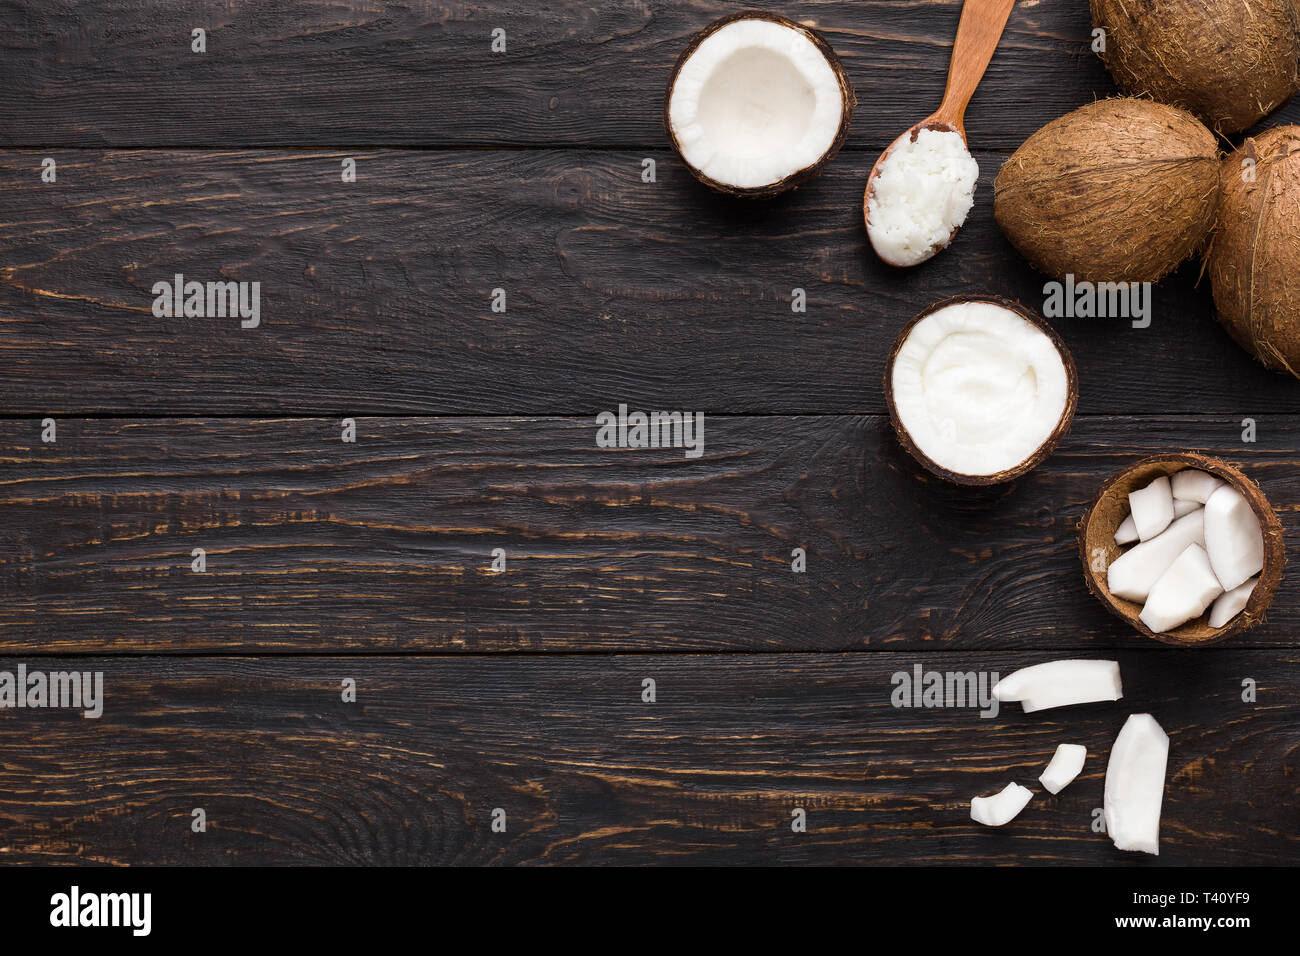 Composition of coconut products Stock Photo